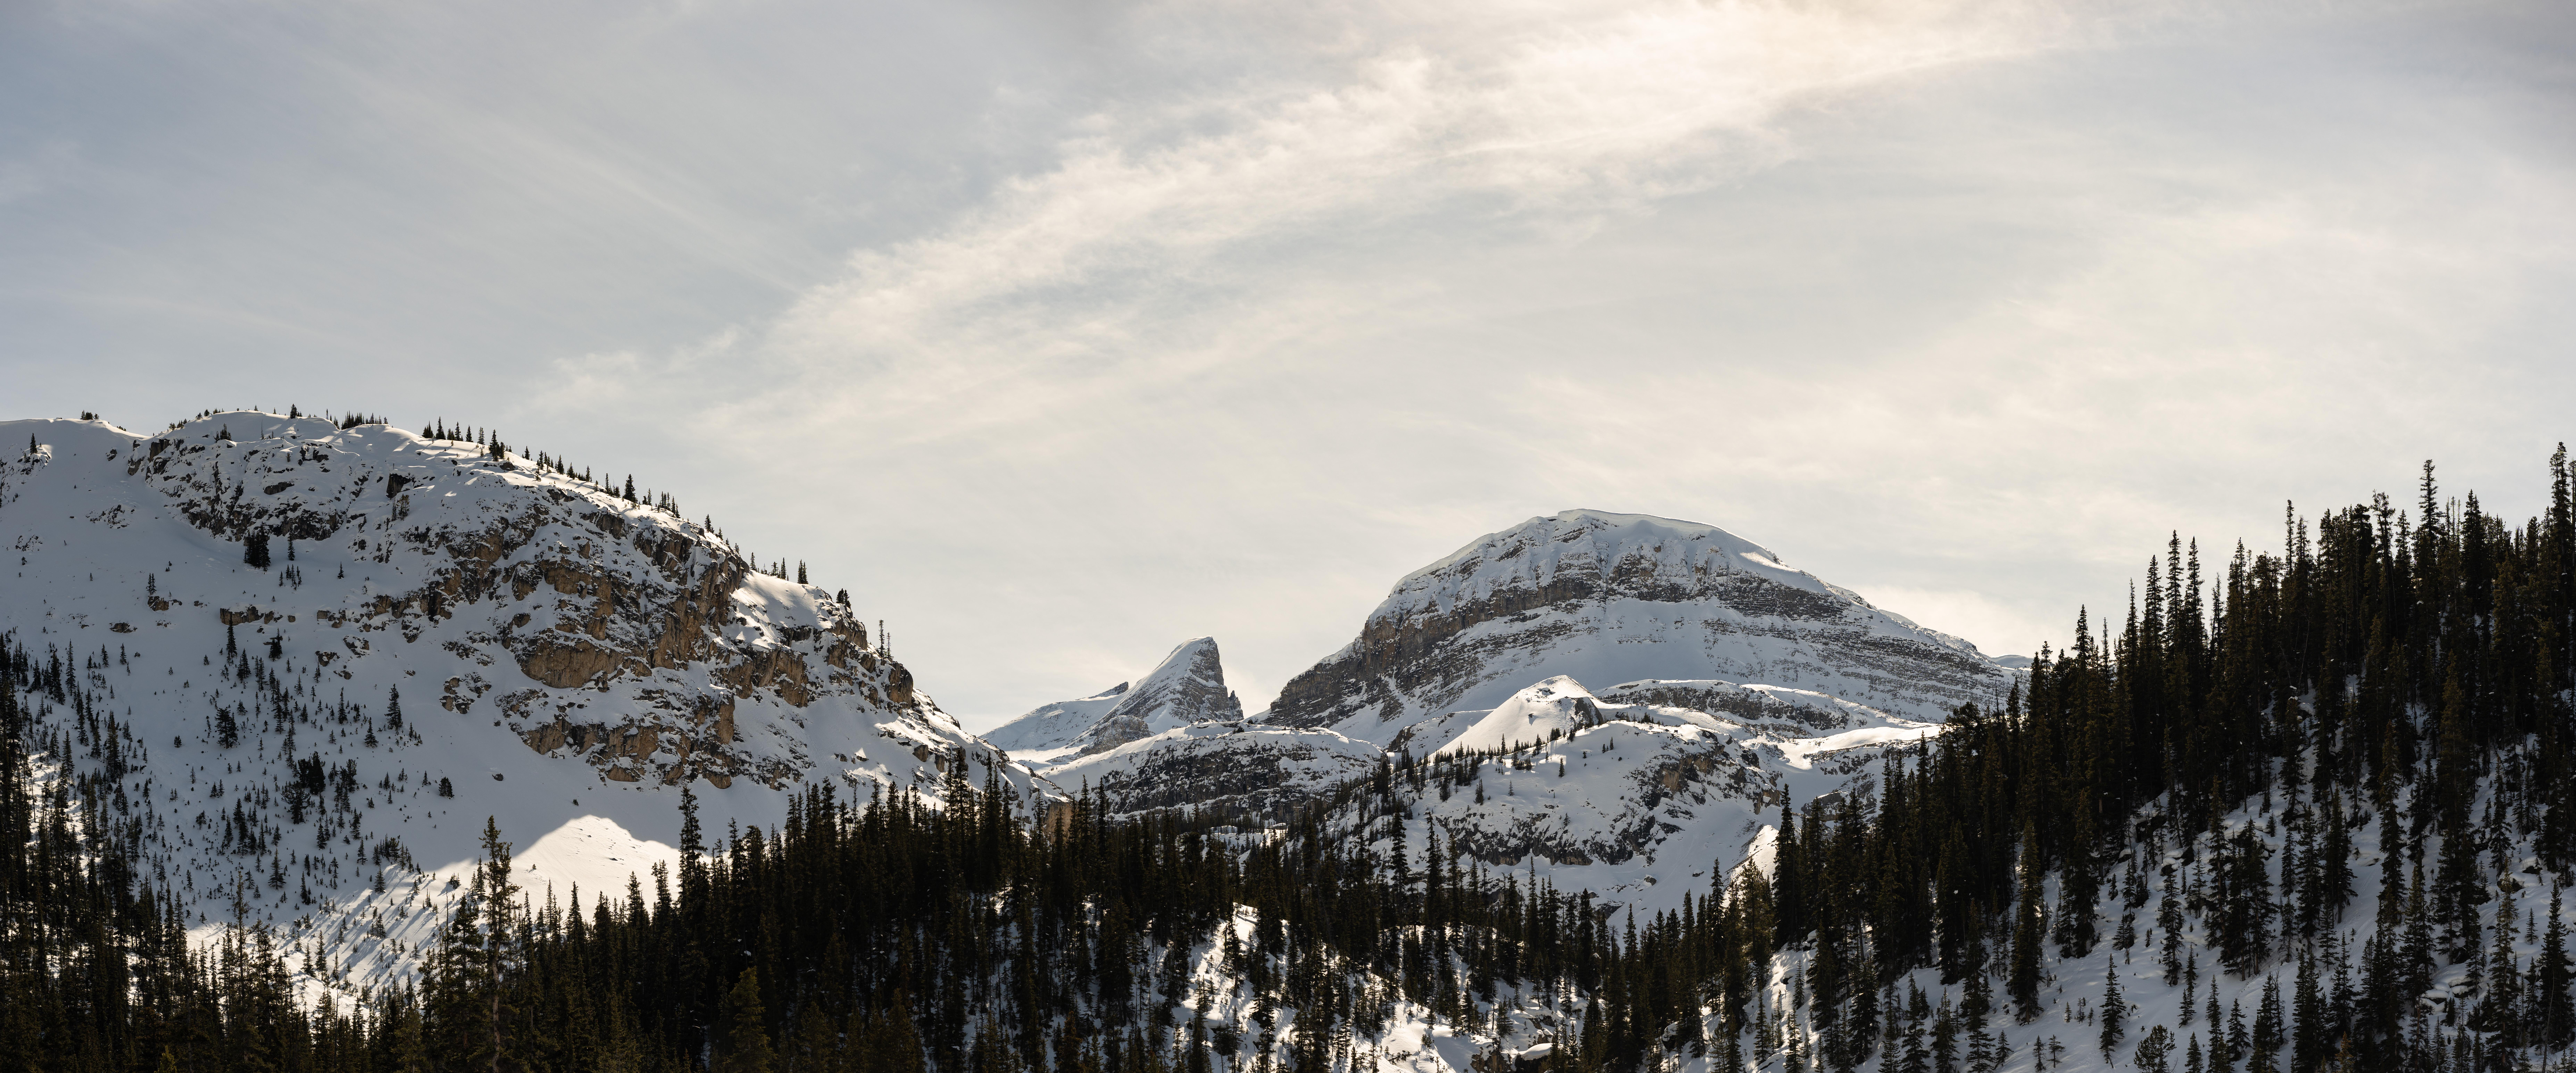 General 14837x6182 Canada Alberta Banff nature landscape forest snow winter mountains panorama cliff cirrus clouds